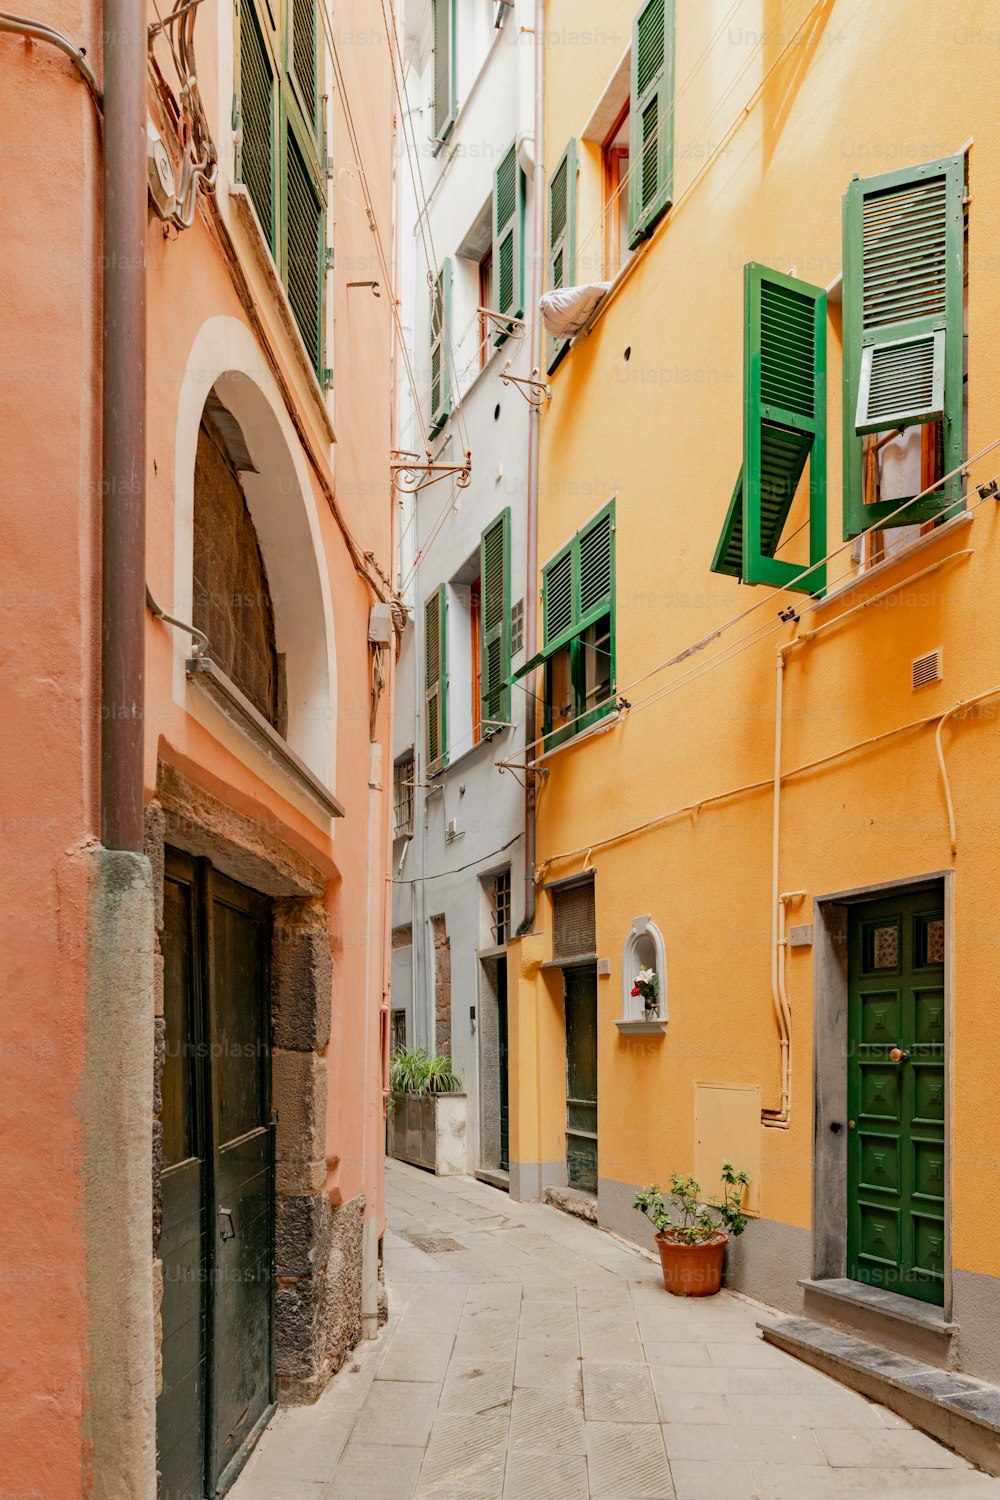 a narrow alleyway with green shuttered windows and green shutters